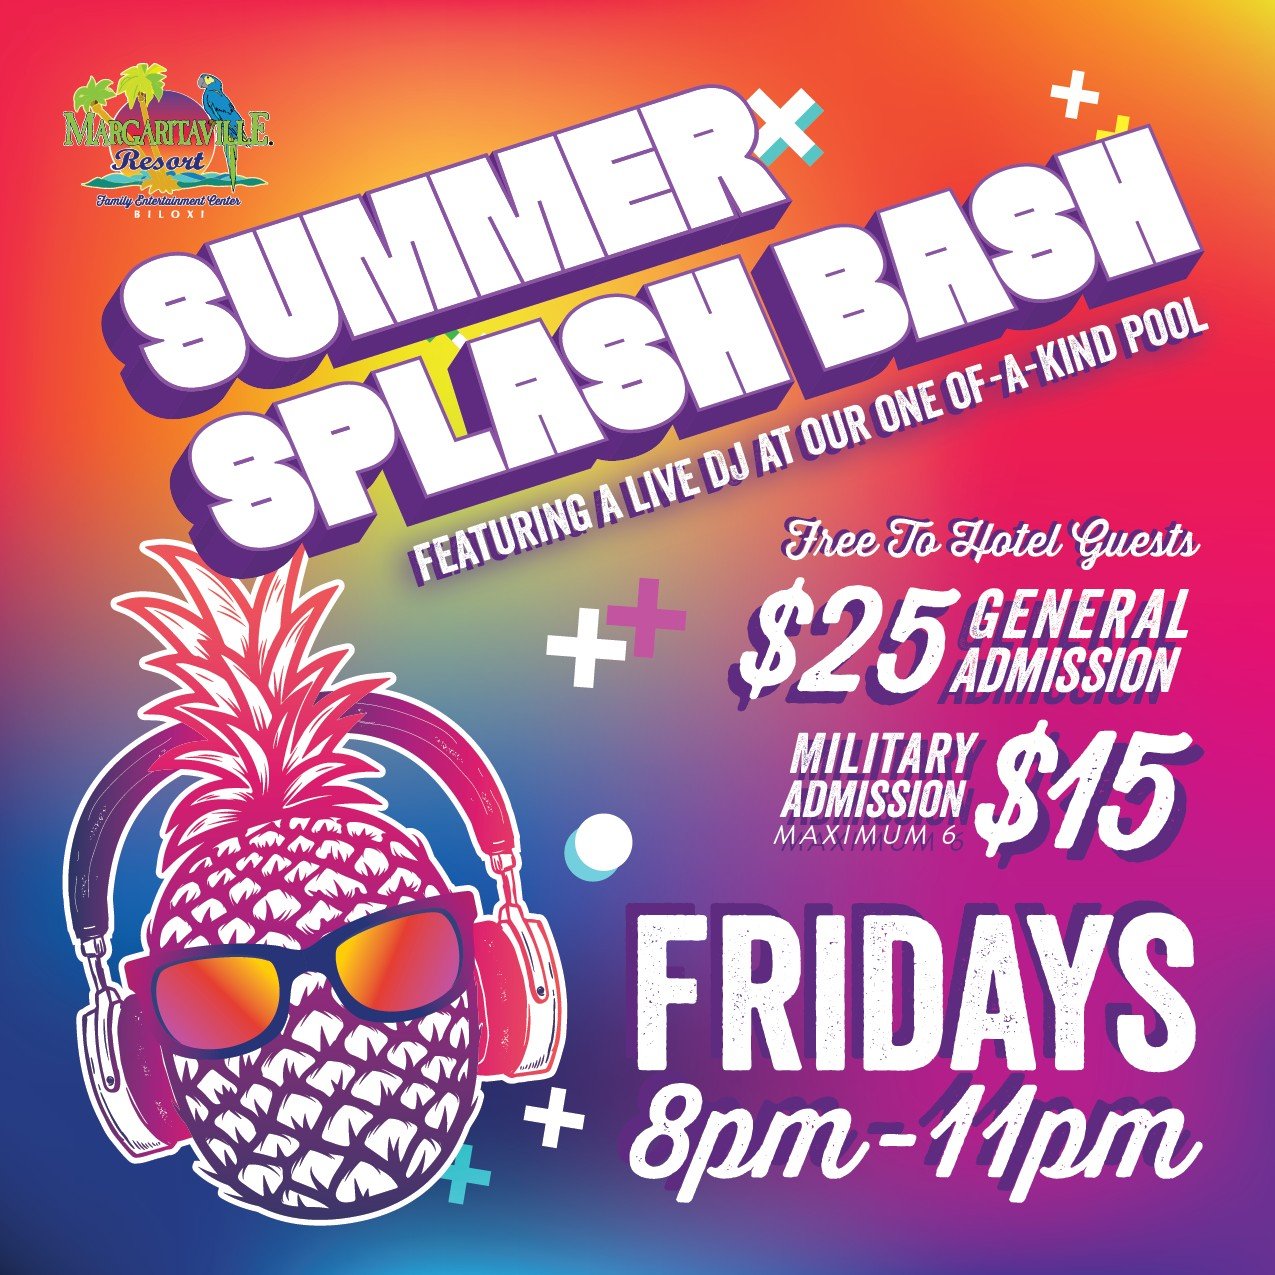 Summer Splash Bash is back and calling your name! Join us on Fridays from 8PM-11PM for the ultimate pool party! 

$25 General Admission | $15 Military Admission